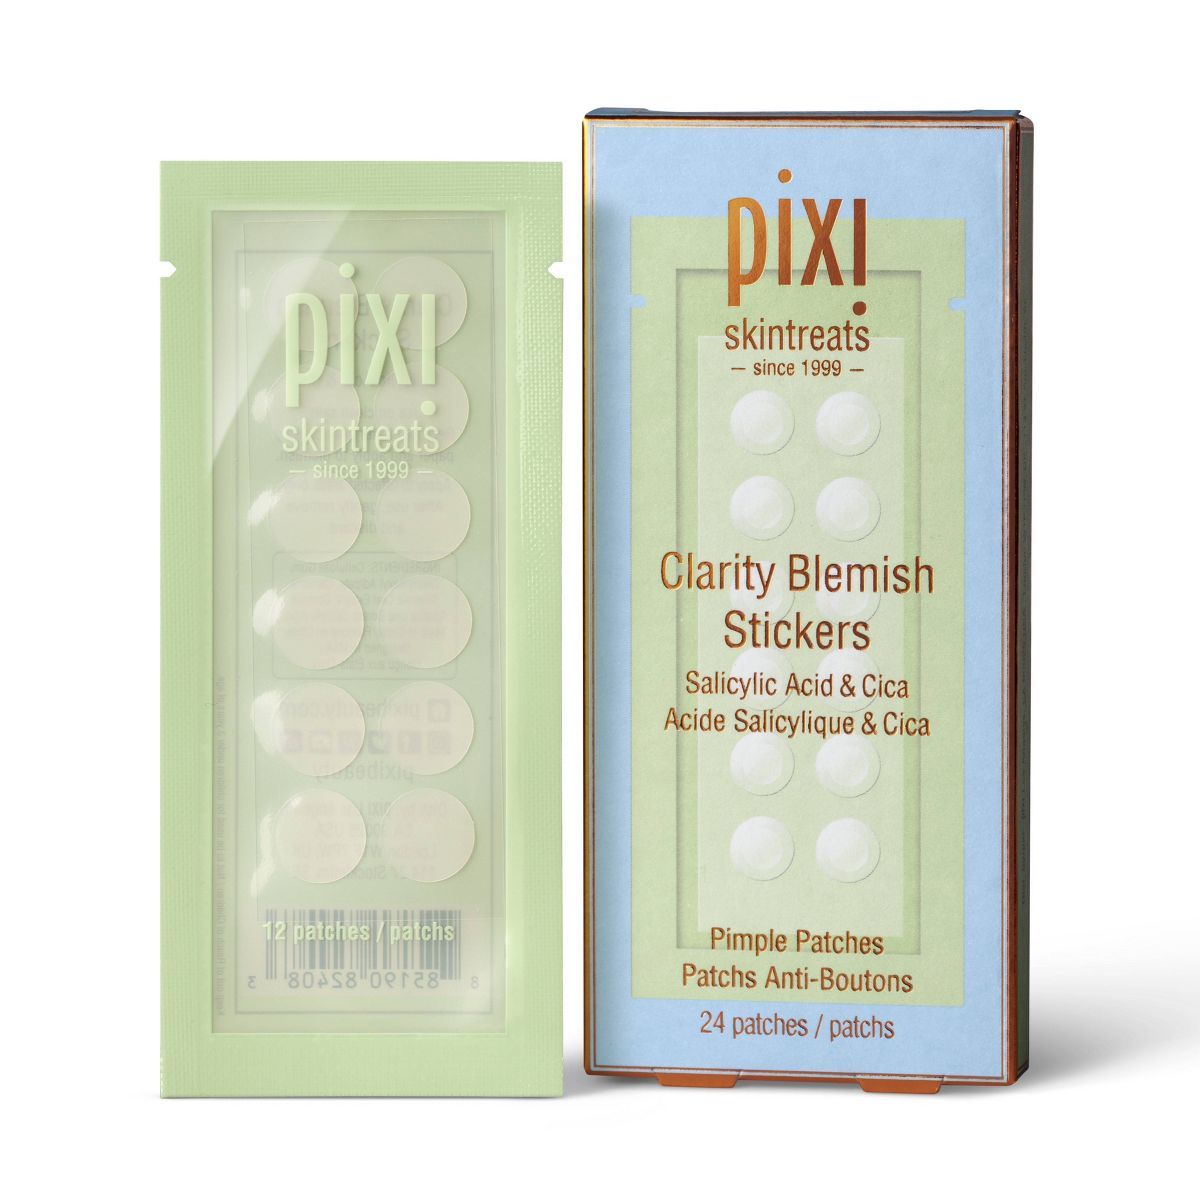 Pixi Clarity Blemish Stickers - Pimple Patches - 24ct | Target